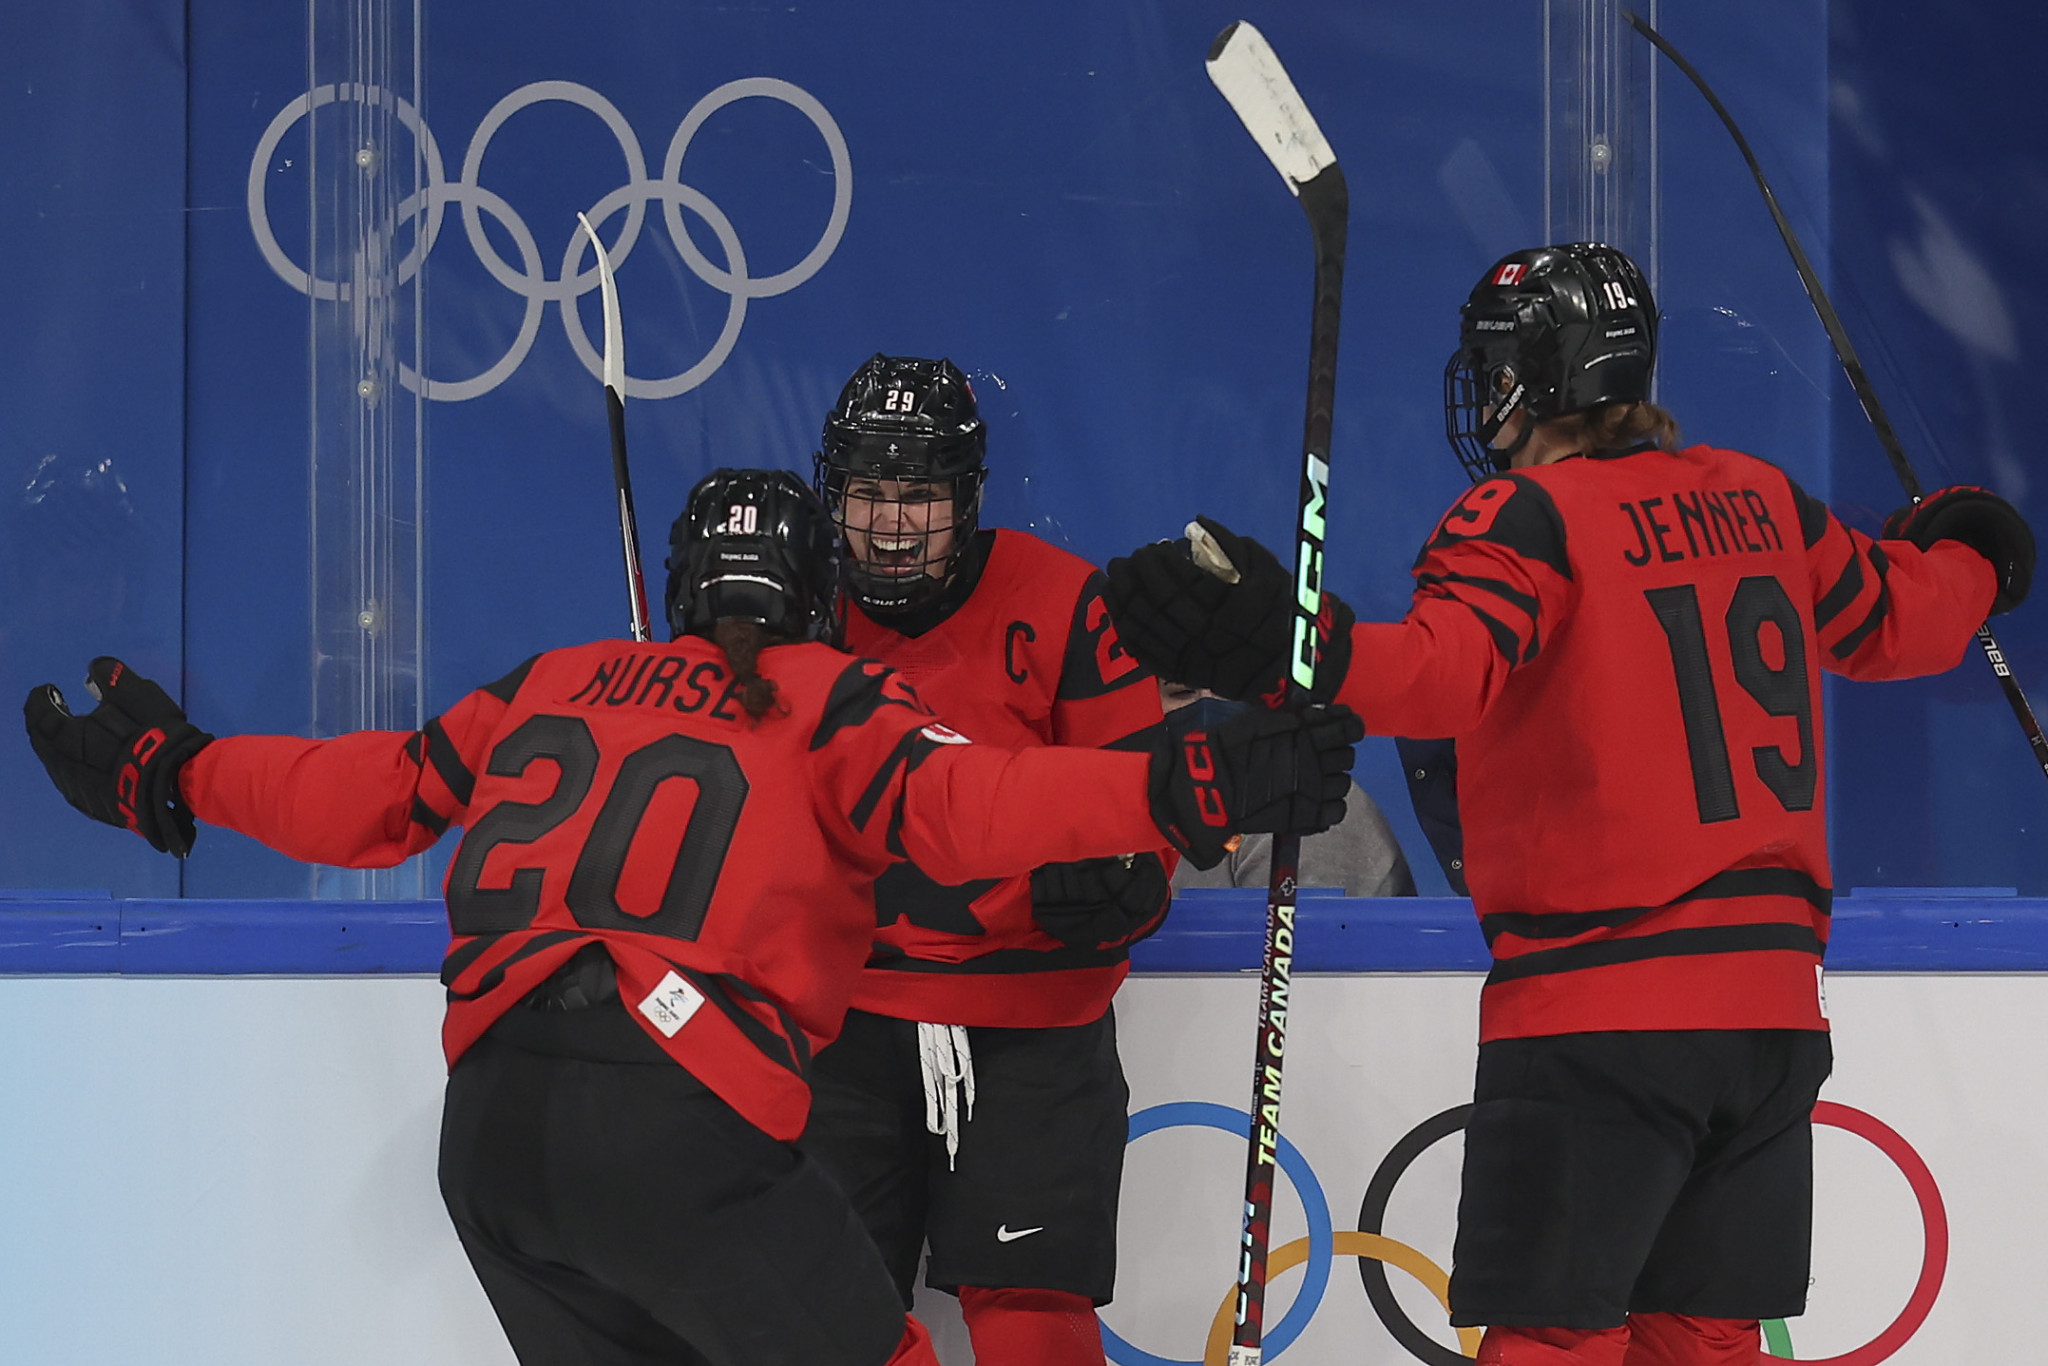 Poulin scored twice in the Olympic final against the United States ©Getty Images